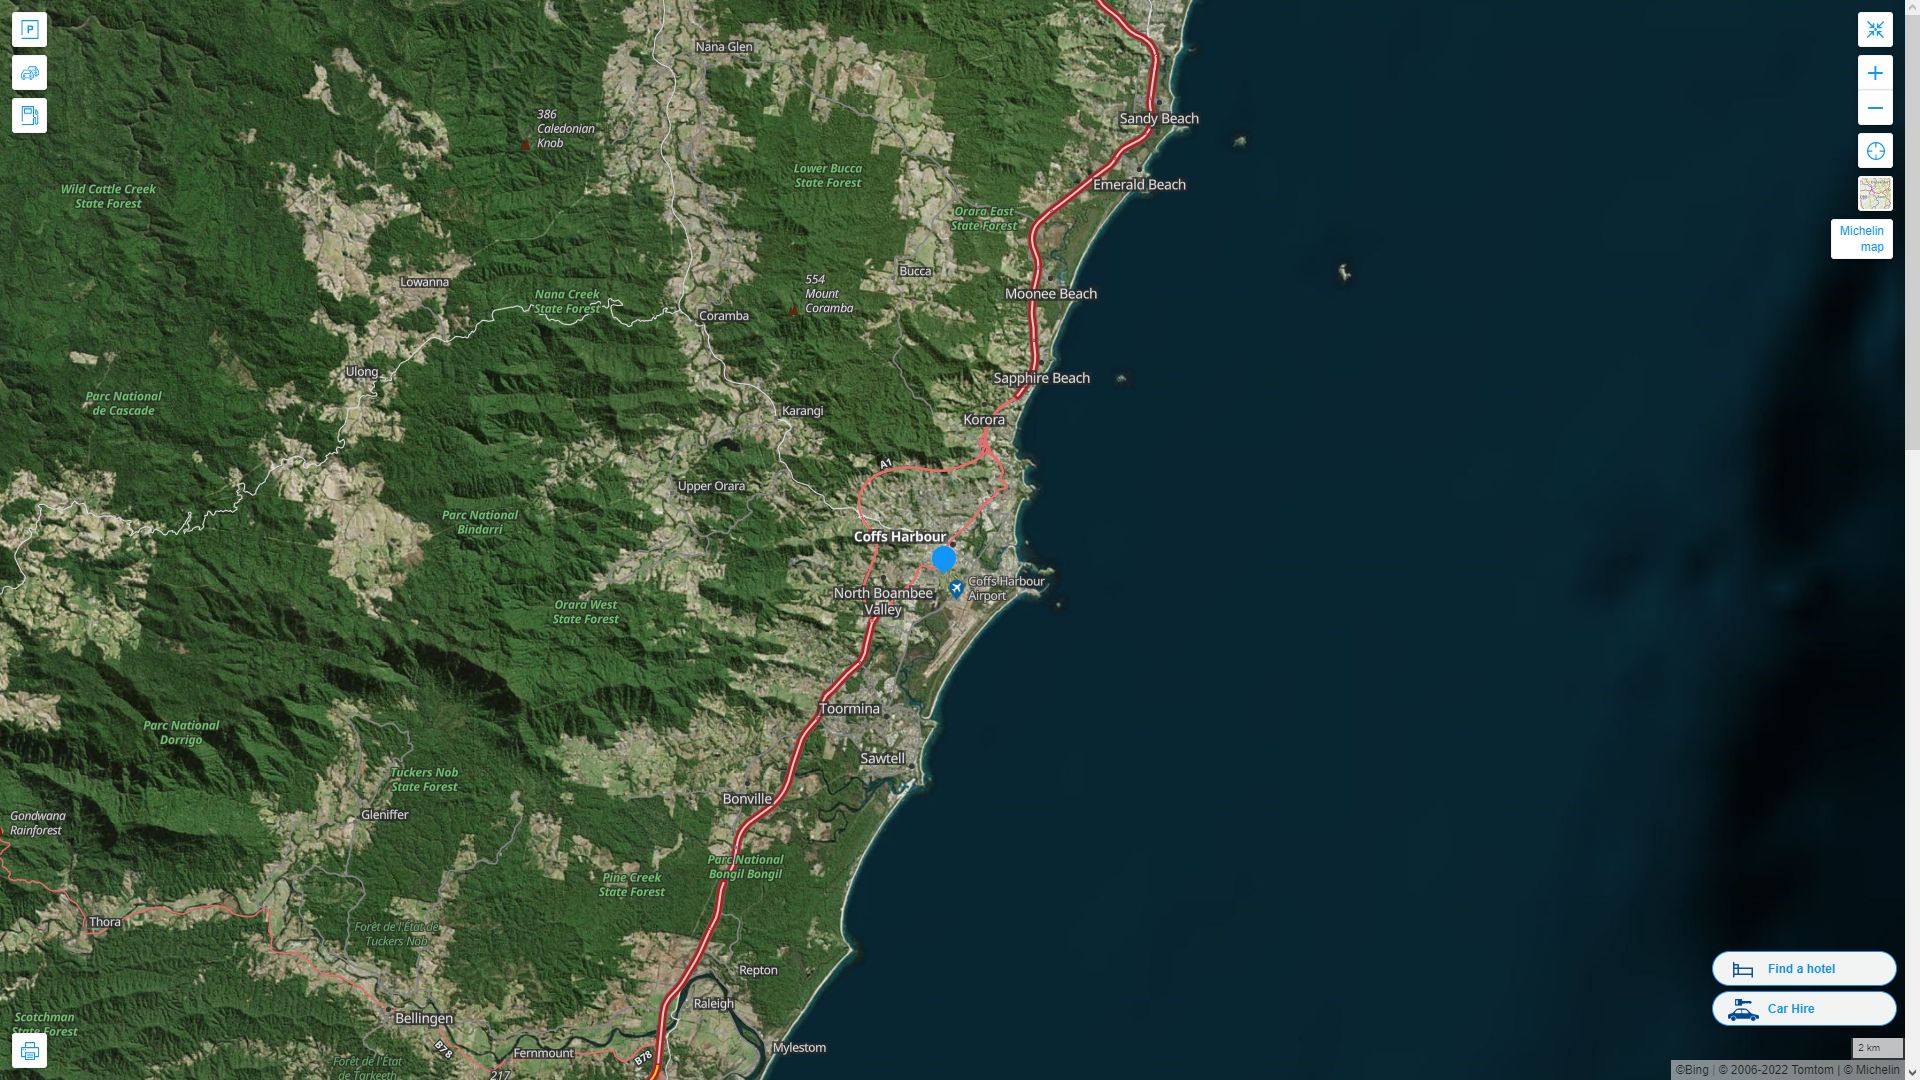 Coffs Harbour Highway and Road Map with Satellite View